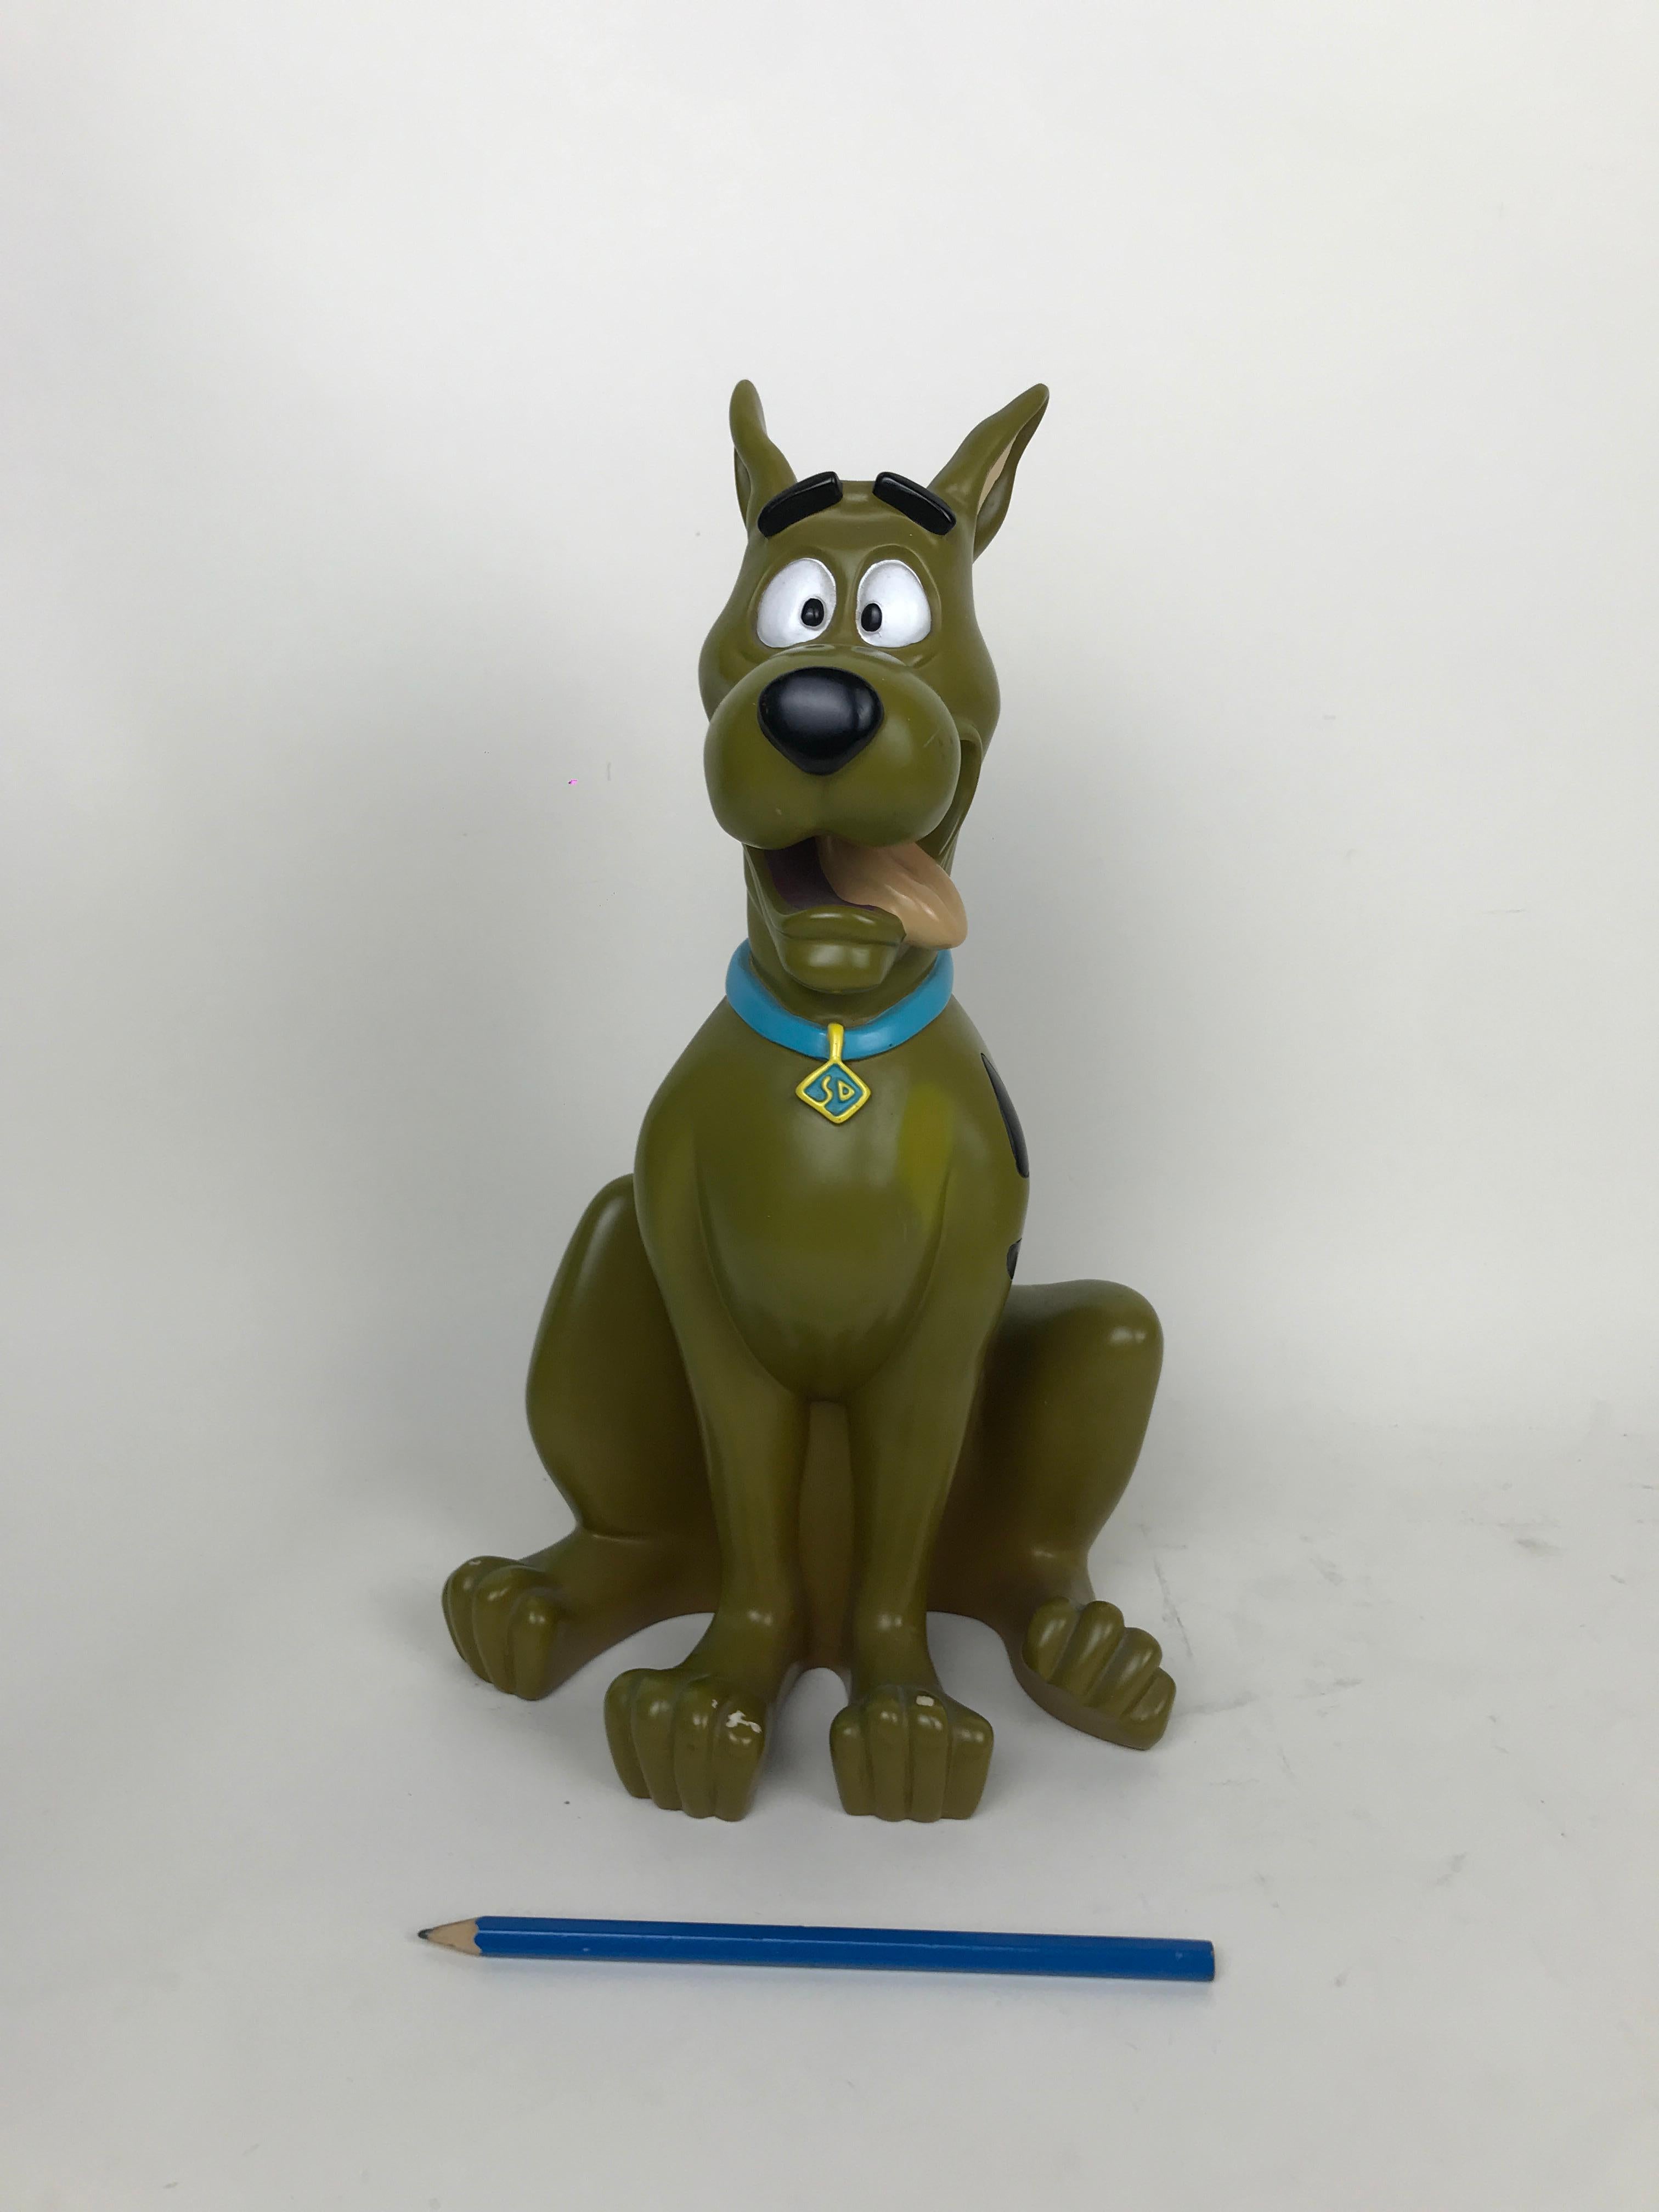 Vintage Scooby-Doo statue by Warner Bros Studio Store made in China in the 1998.

Marked on bottom:
Design Exclusive for Warner Bros Studio Store
Made in China TM & WB 1998
TM & Hanna-Barbera
Cartoon Network and logo
TM The Cartoon Network